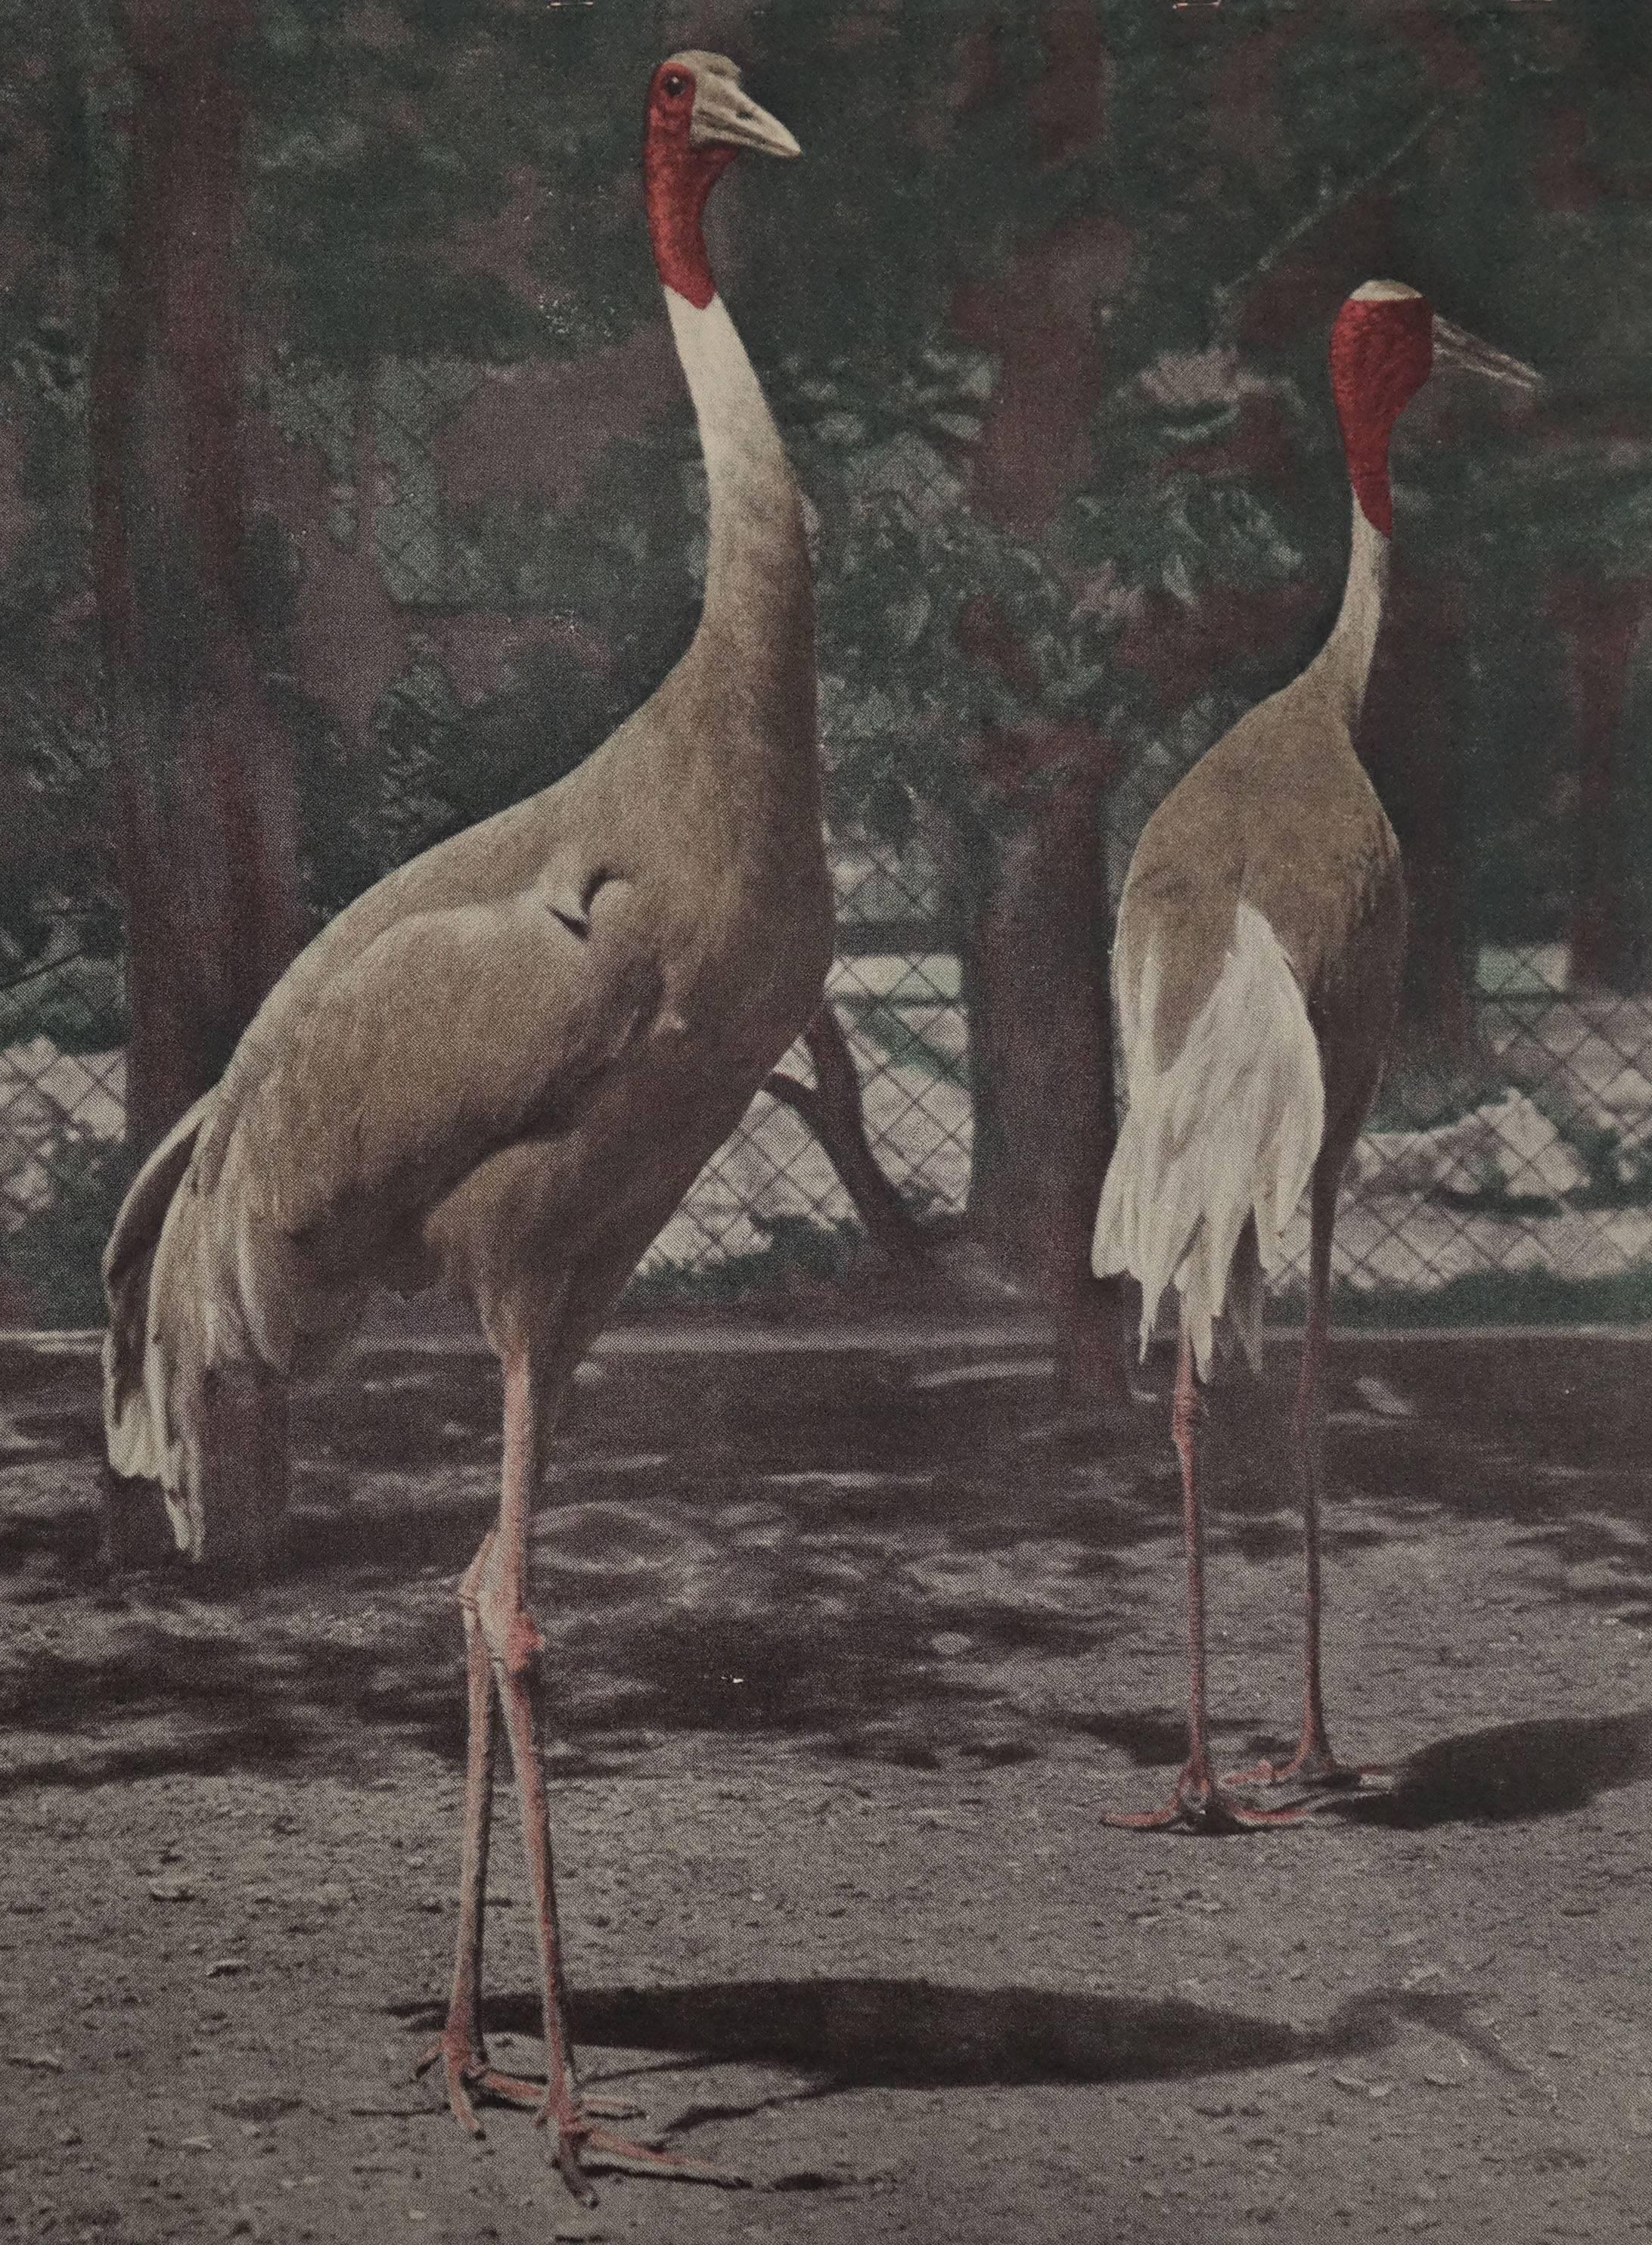 Large early 20th century photochrom (photo-chromolithographic) educational wall chart of cranes at the Vienna Zoo. Part of the 'Photographic Nature Scenes for Education' series, produced by the 'Hof- und Staatsdruckerei', Vienna, from 1903 until